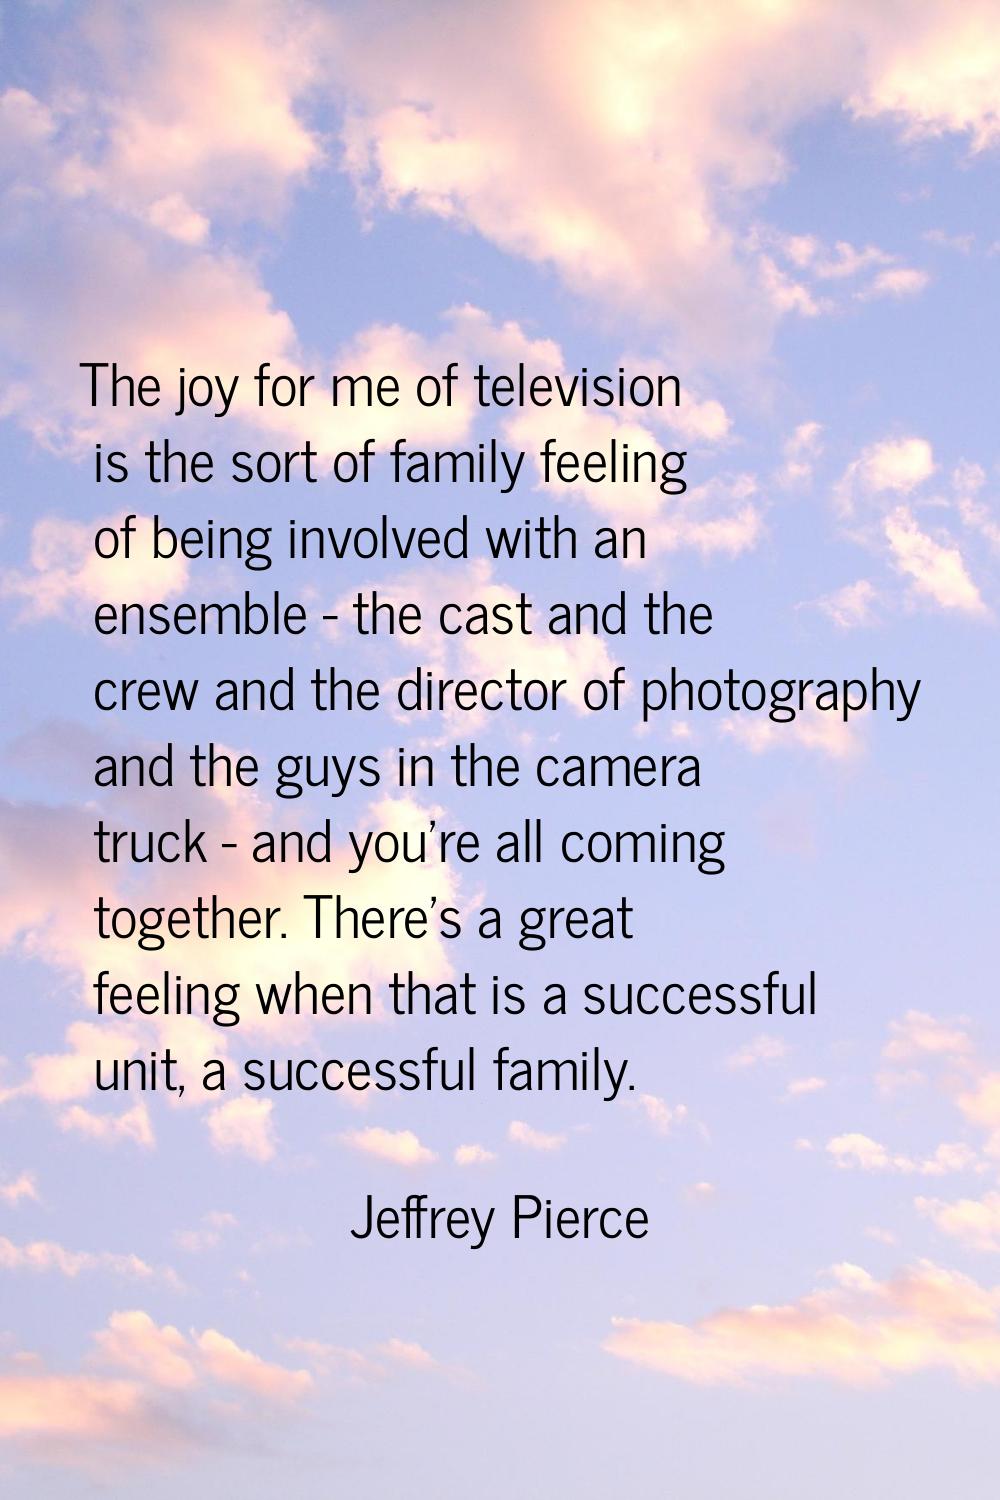 The joy for me of television is the sort of family feeling of being involved with an ensemble - the